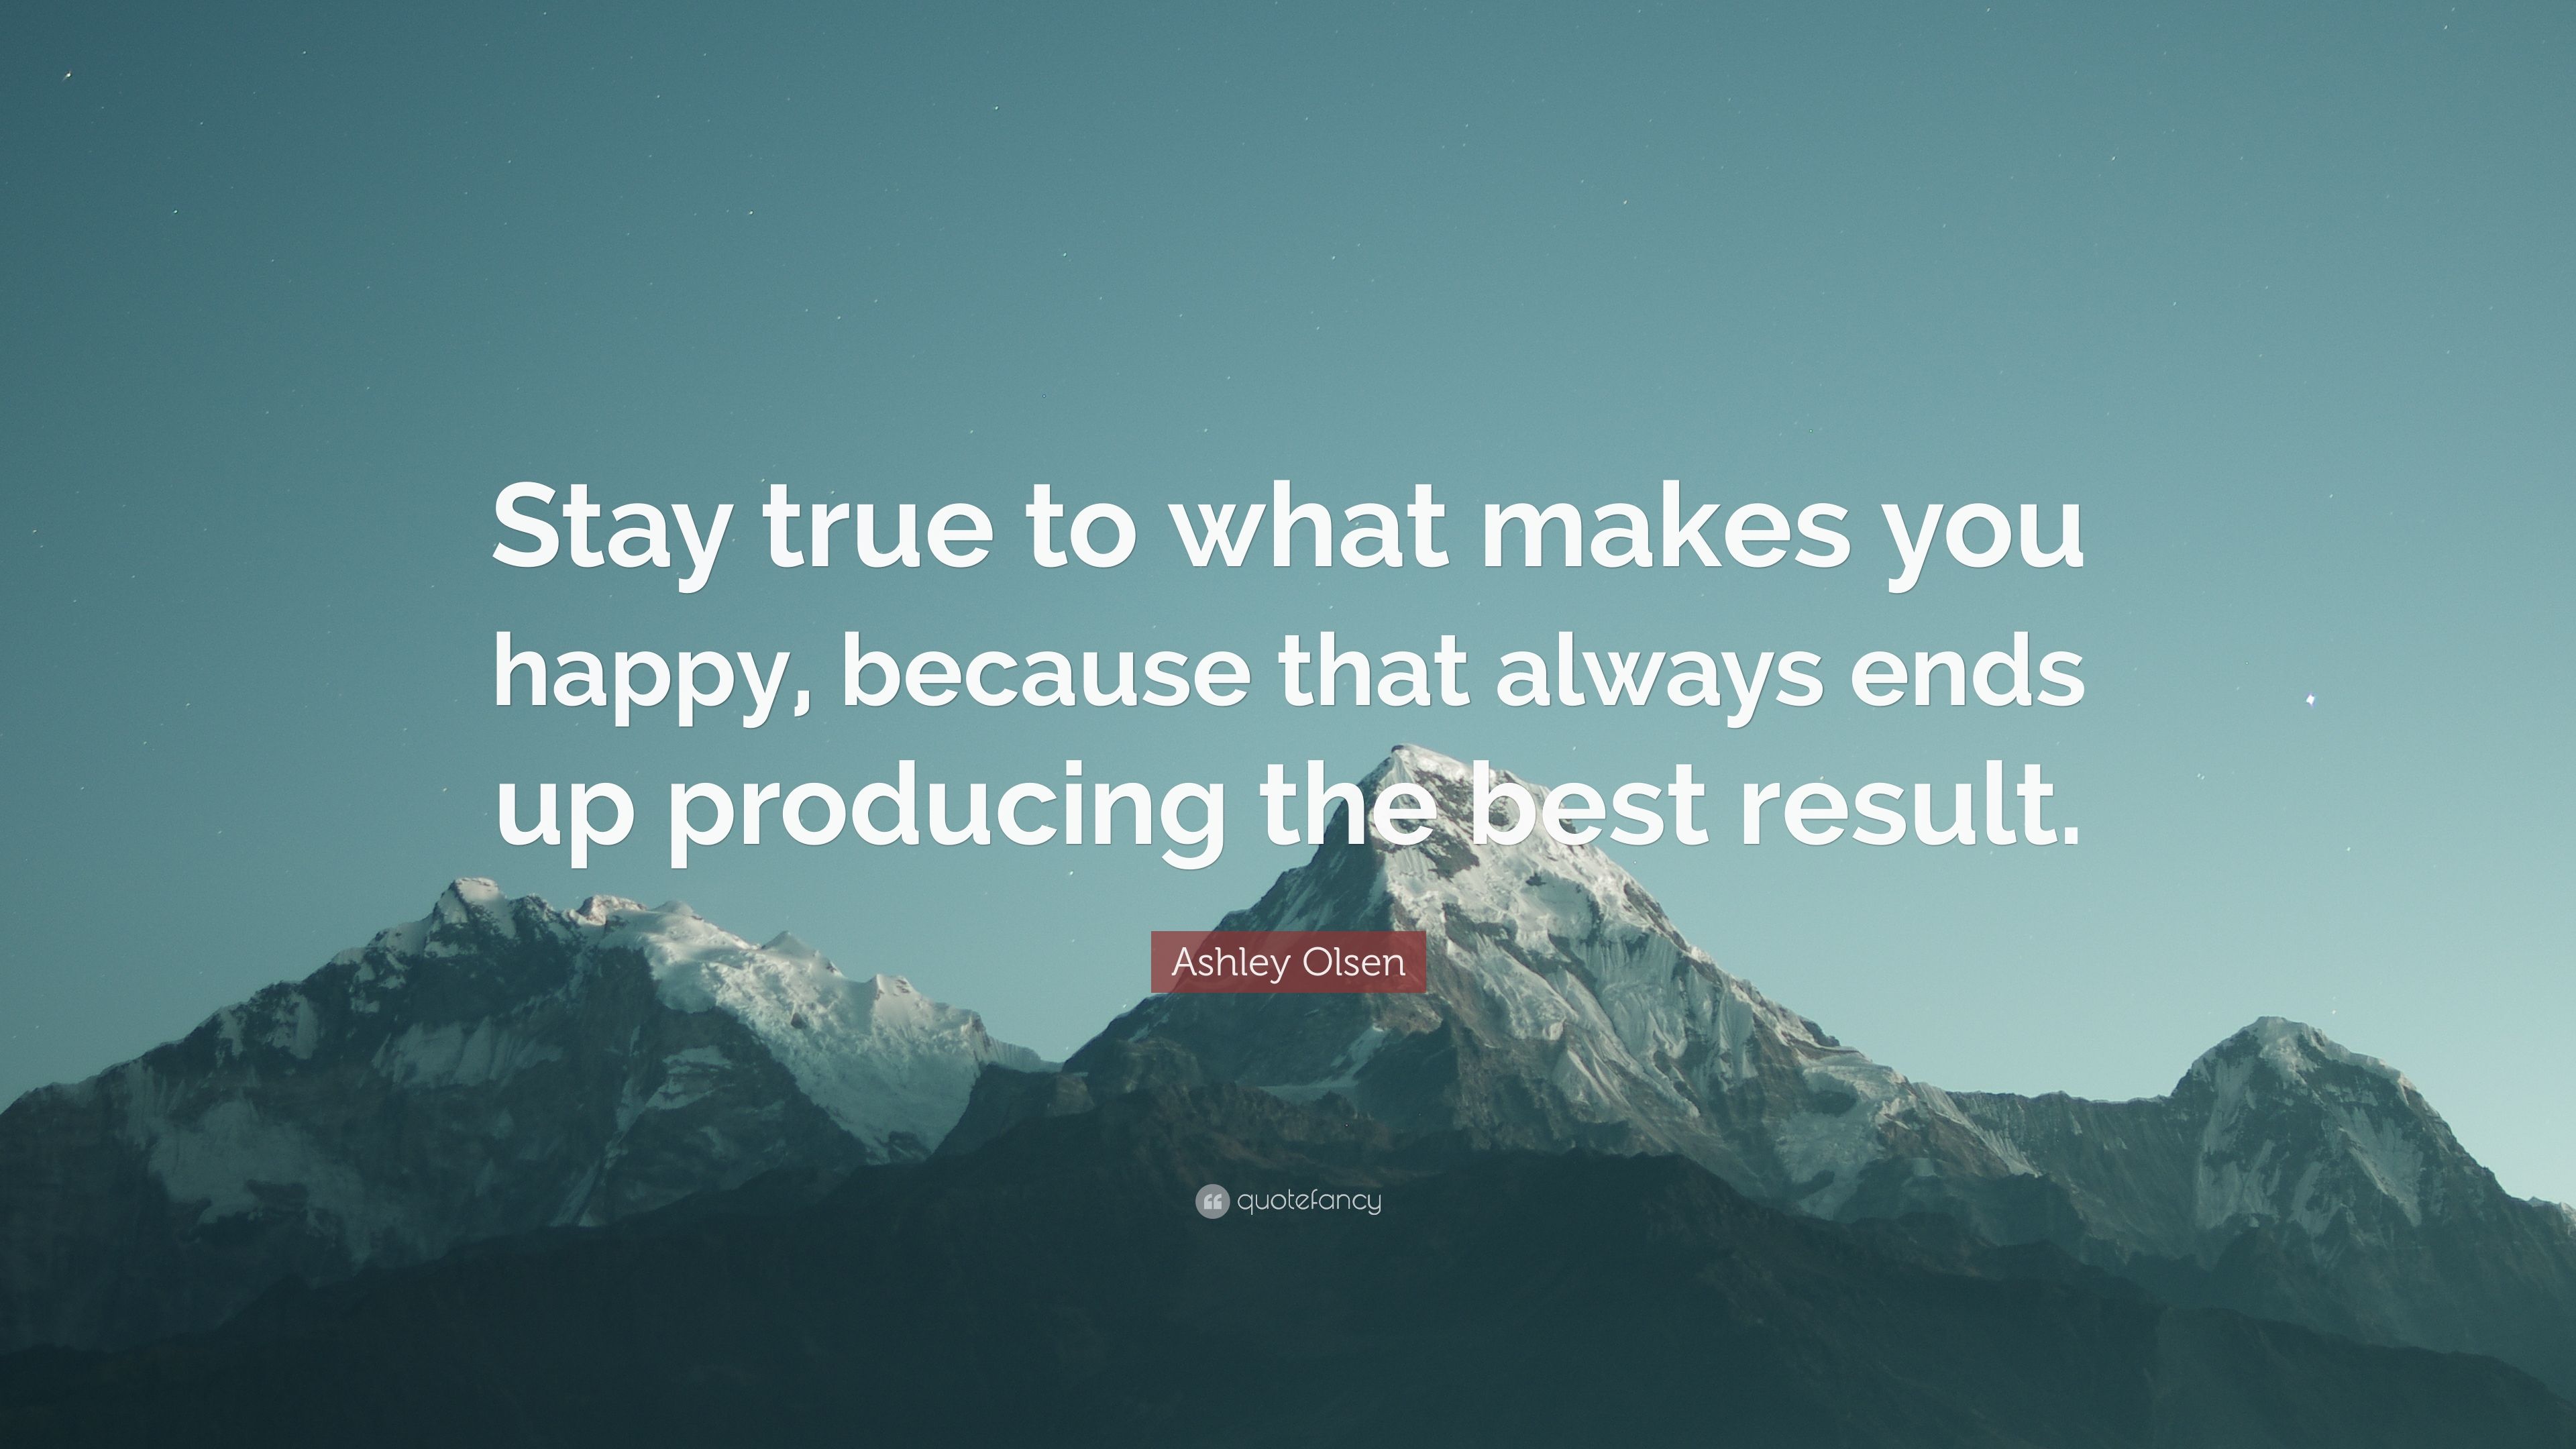 Ashley Olsen Quote: “Stay true to what makes you happy, because that always ends up producing